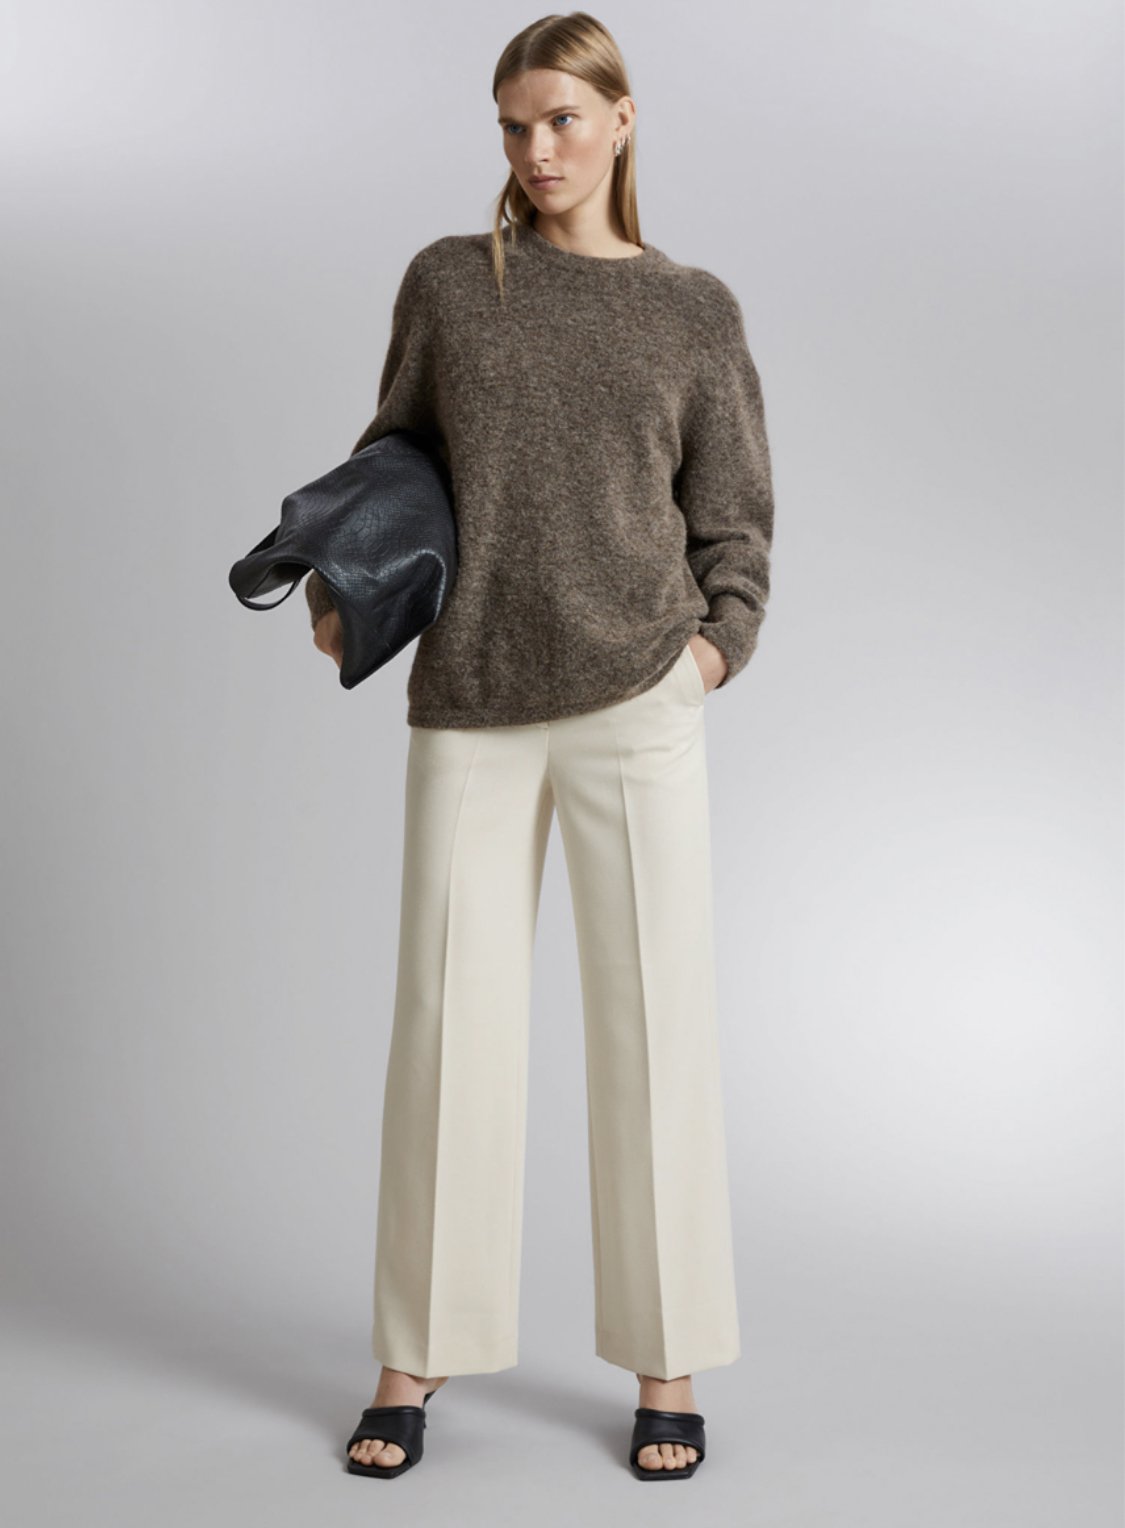 & Other Stories - relaxed knit sweater